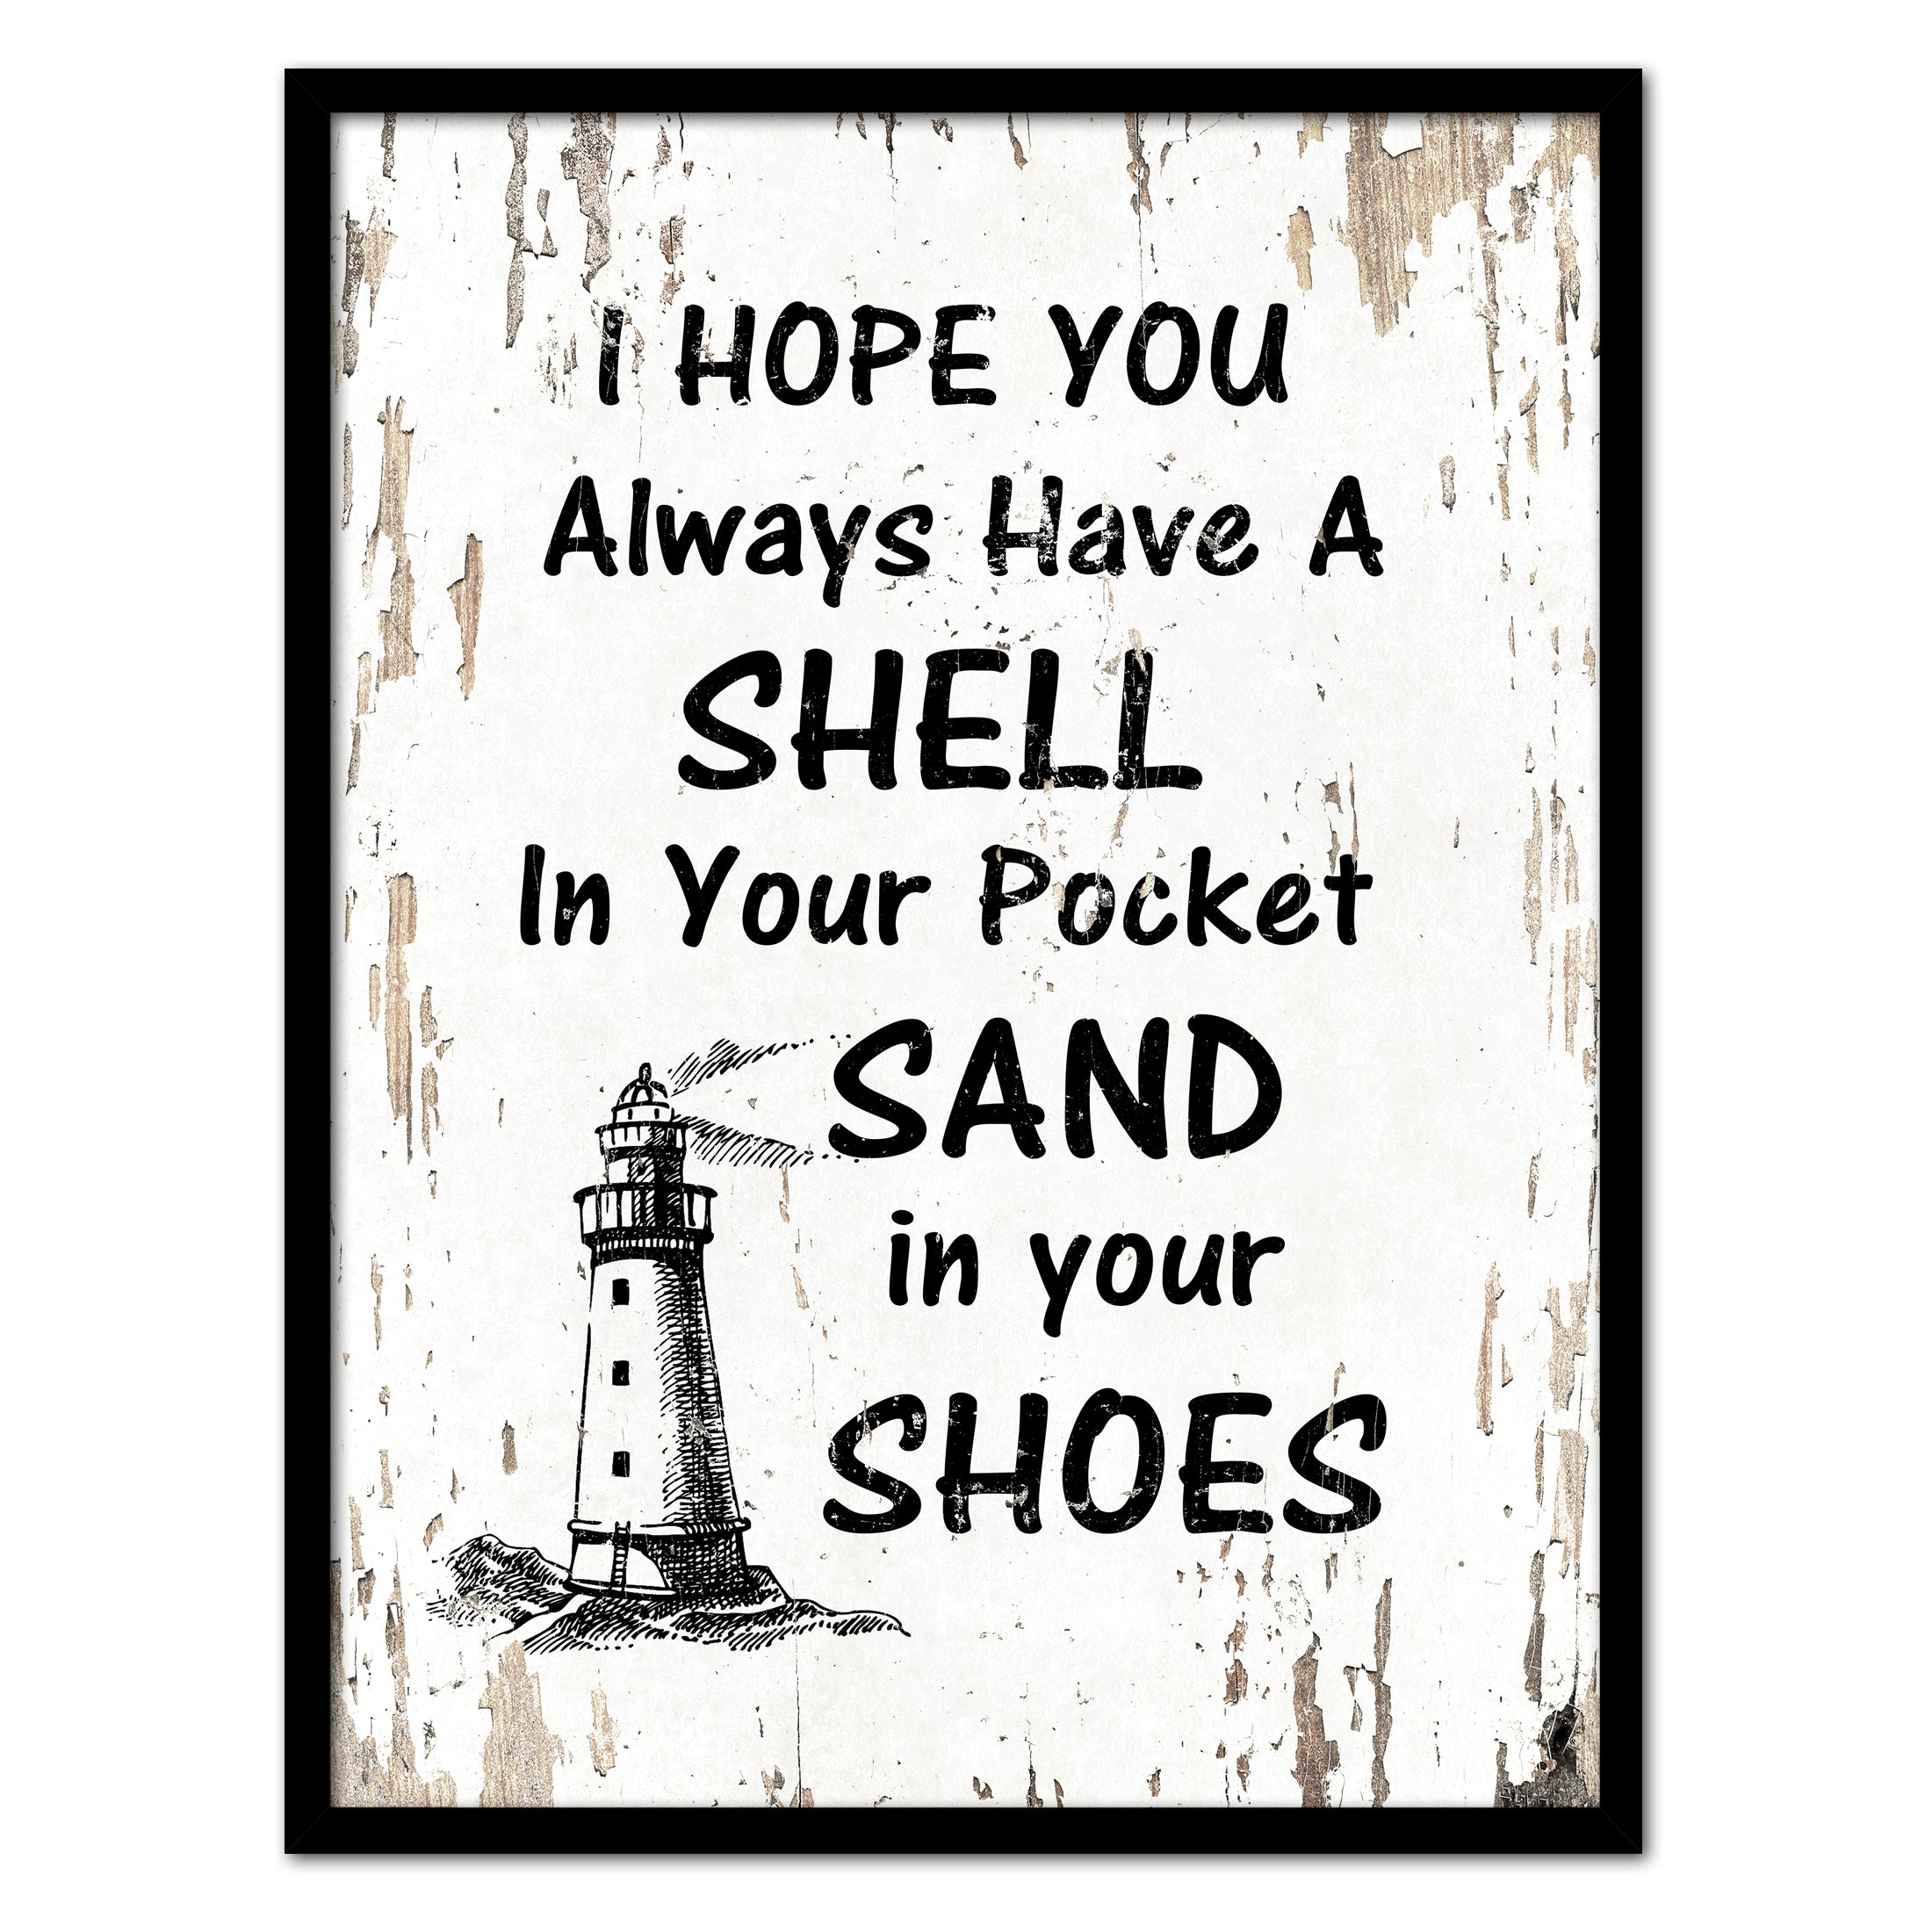 I Hope You Always Have A Shell In Your Pocket Saying Canvas Print, Black Picture Frame Home Decor Wall Art Gifts